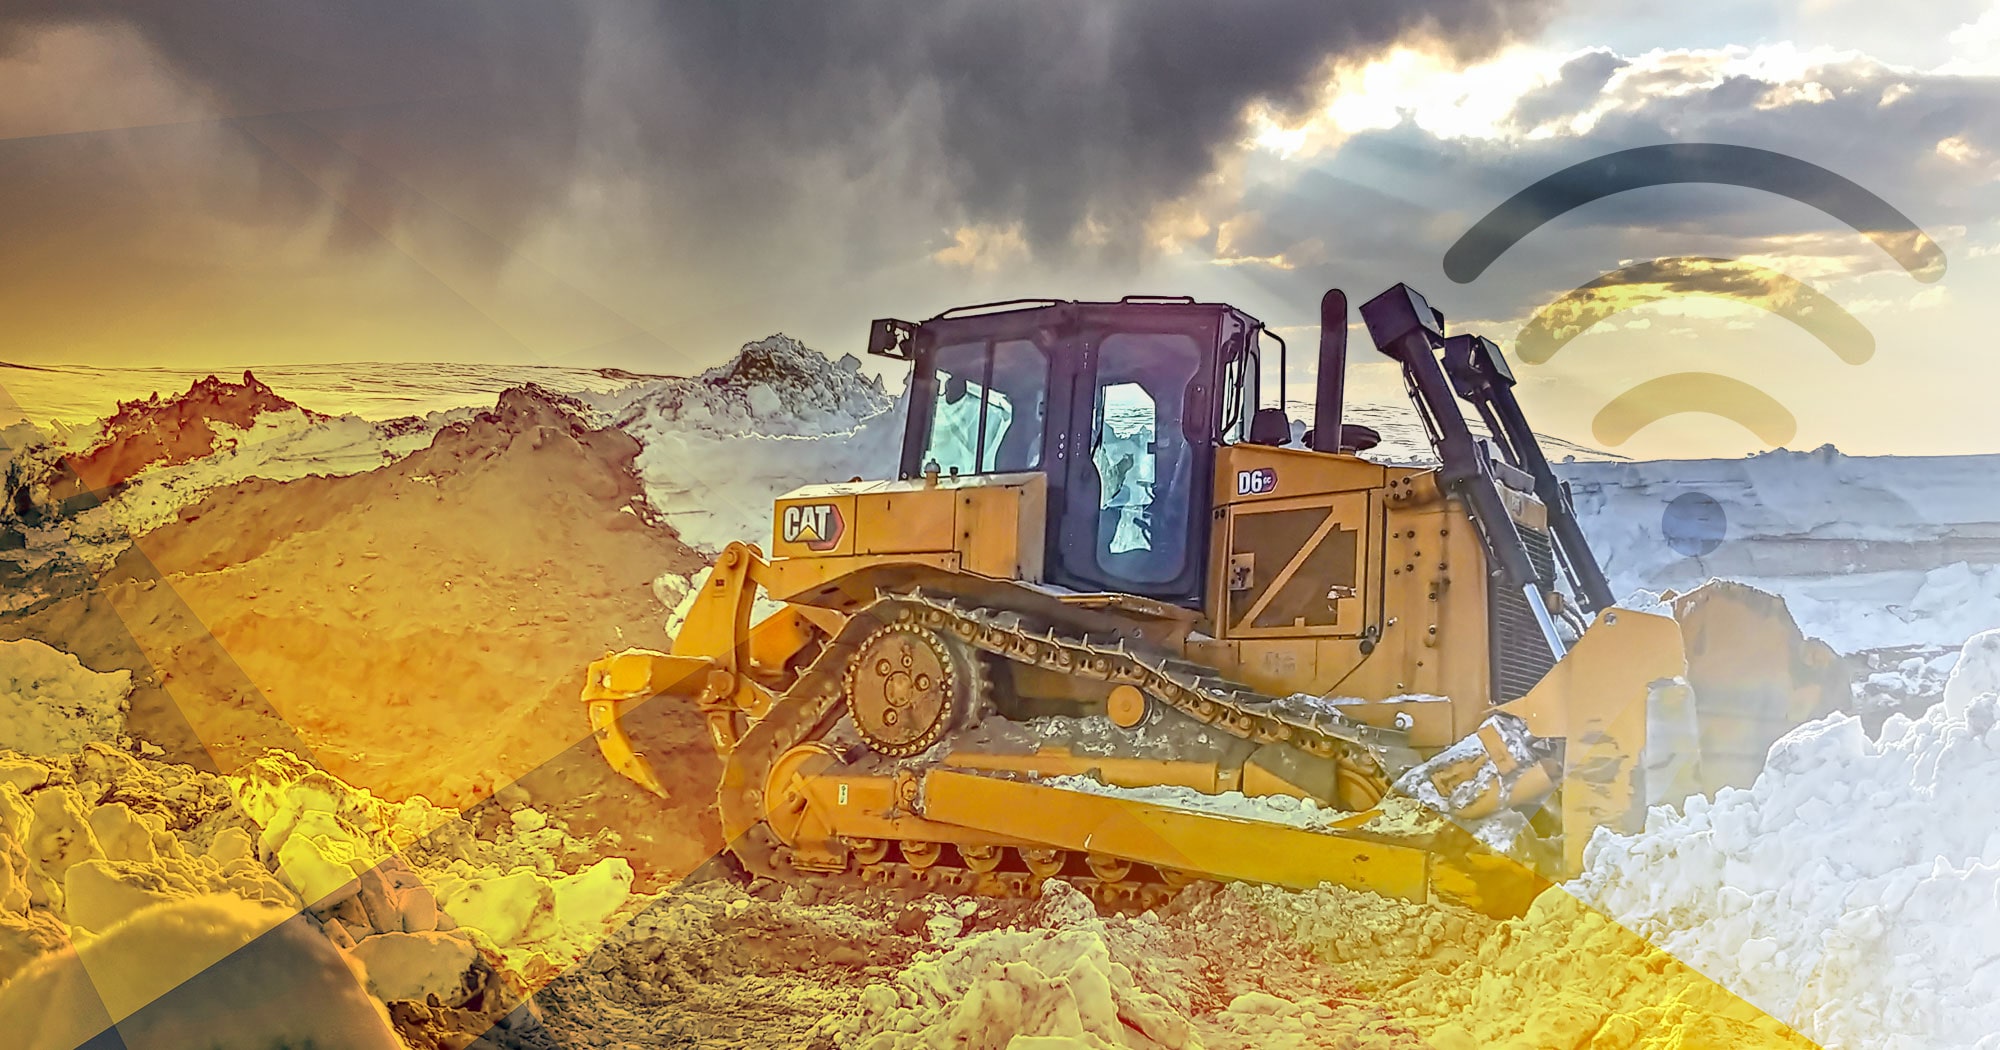 Moving mountains of data - tech in the construction industry image